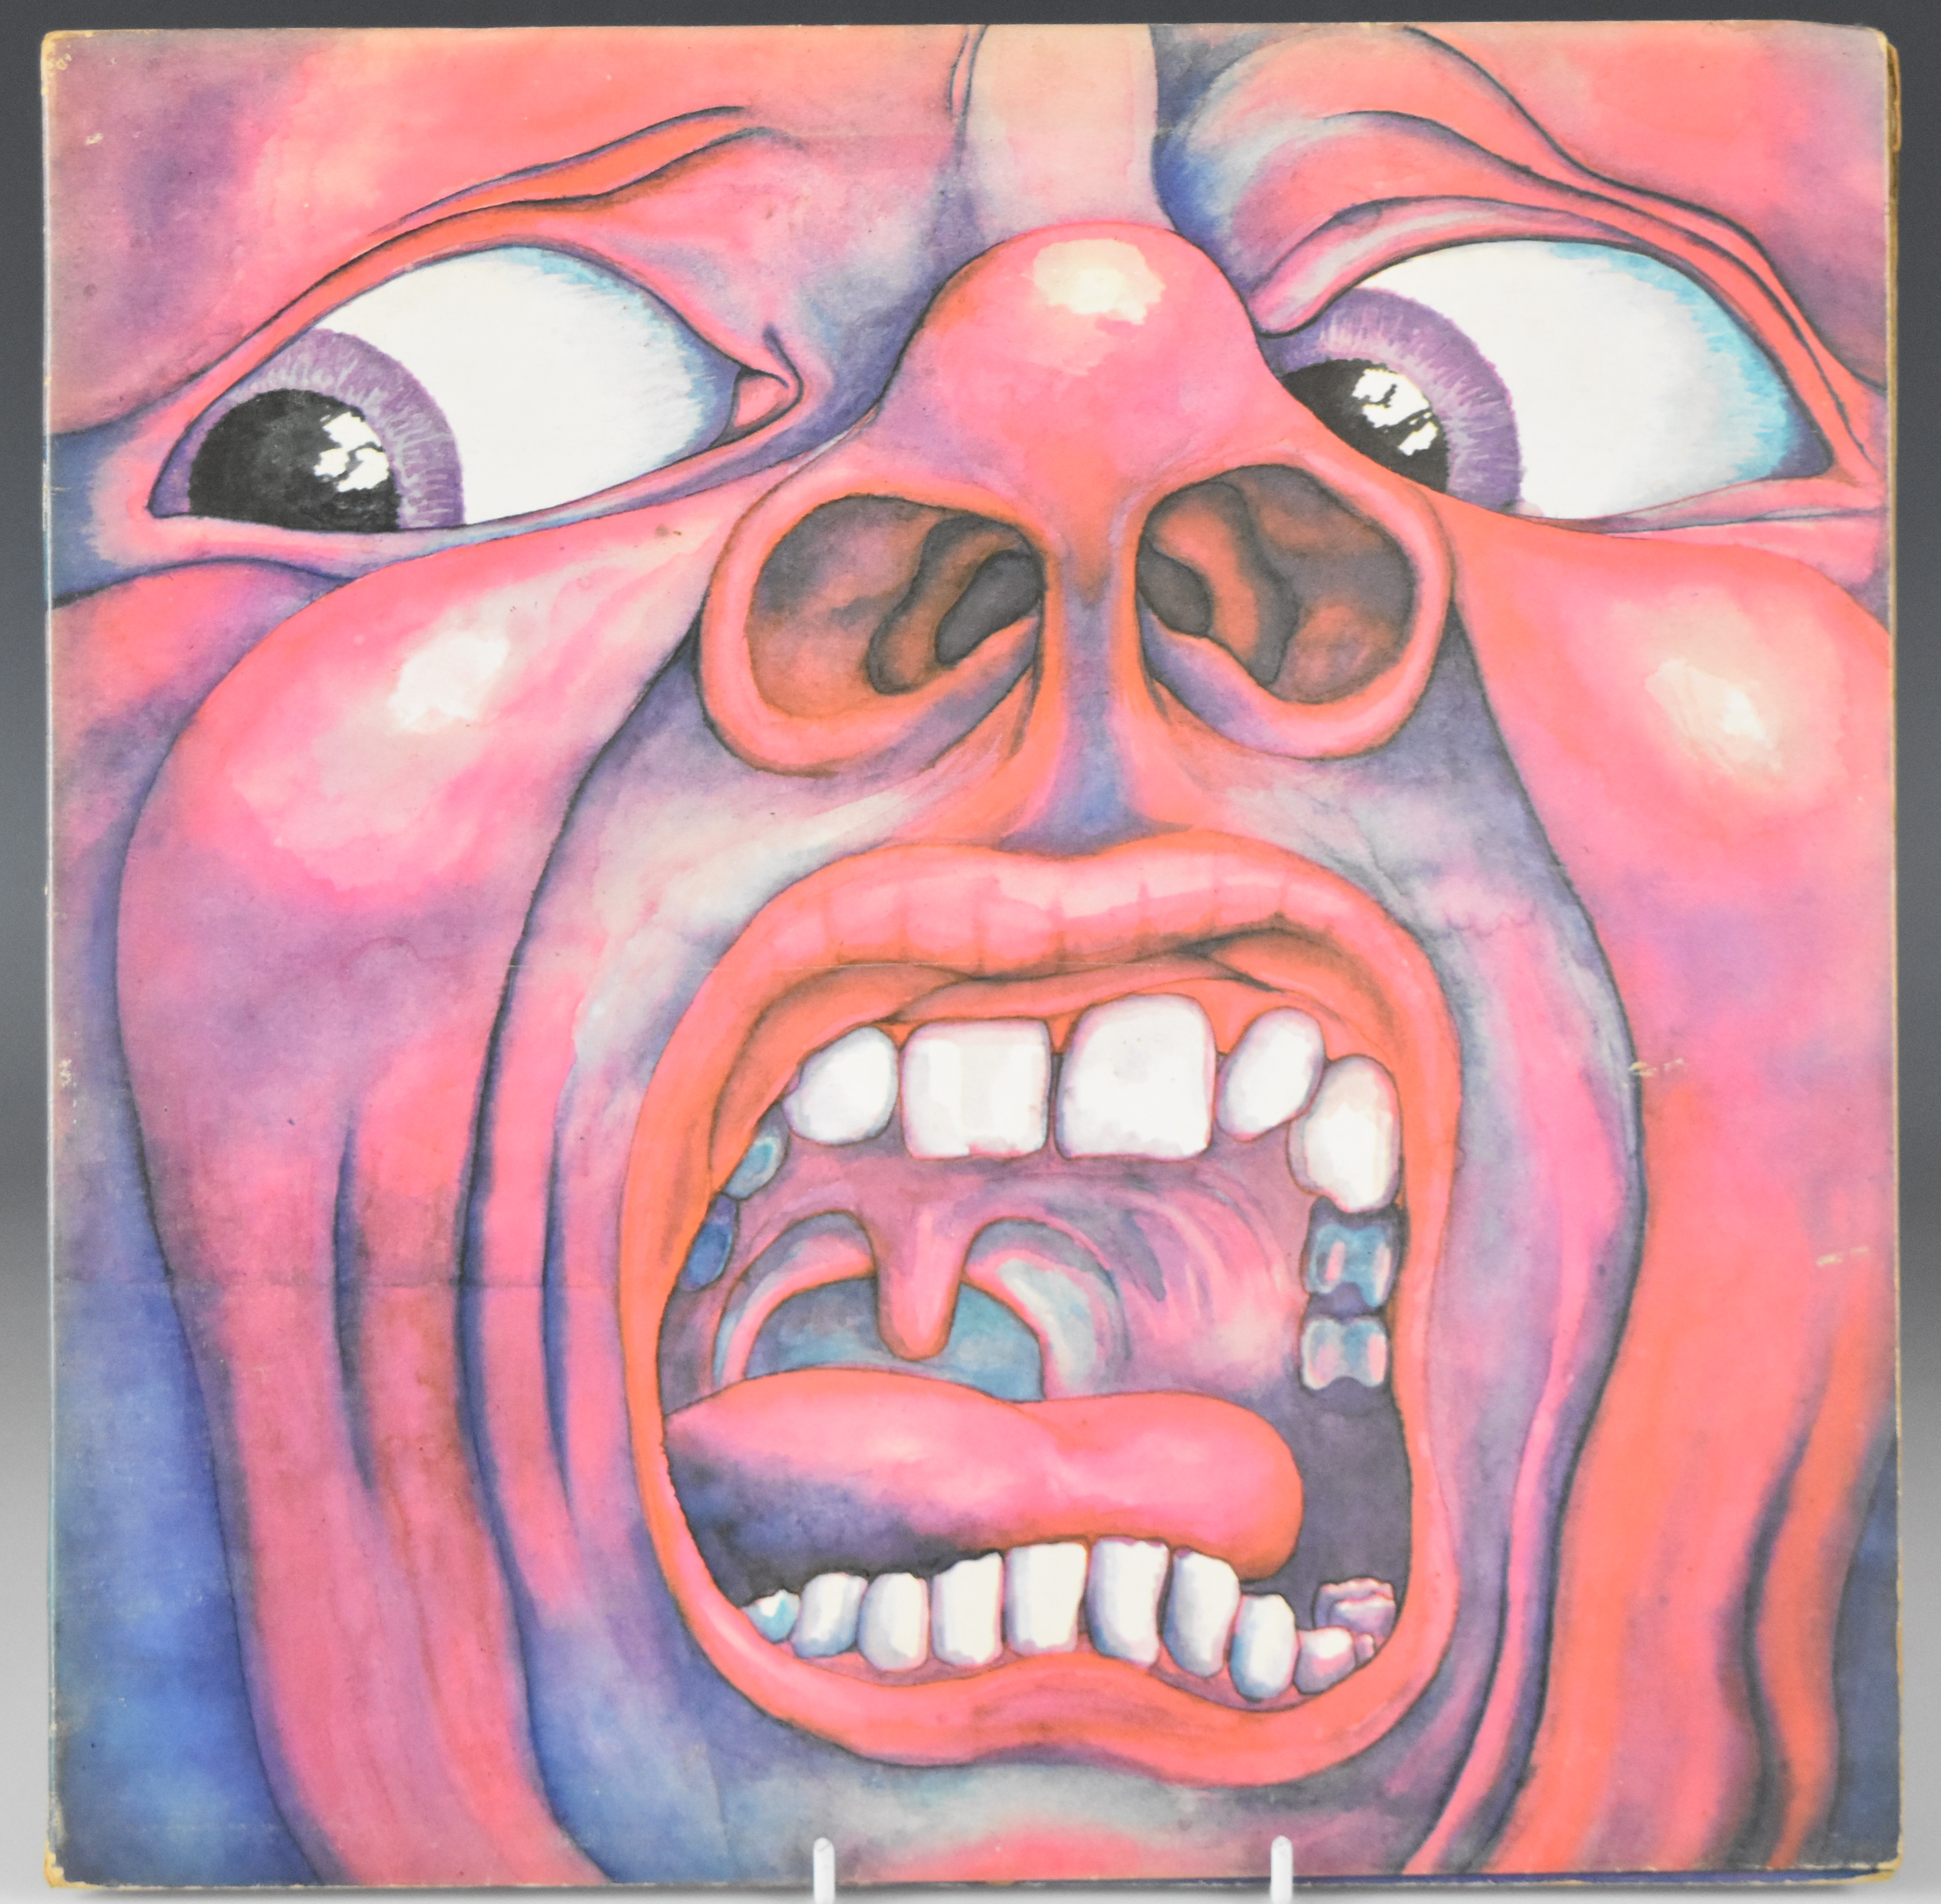 King Crimson In The Court Of The Crimson King (LPS 9111) Island UK first pressing with pink label,